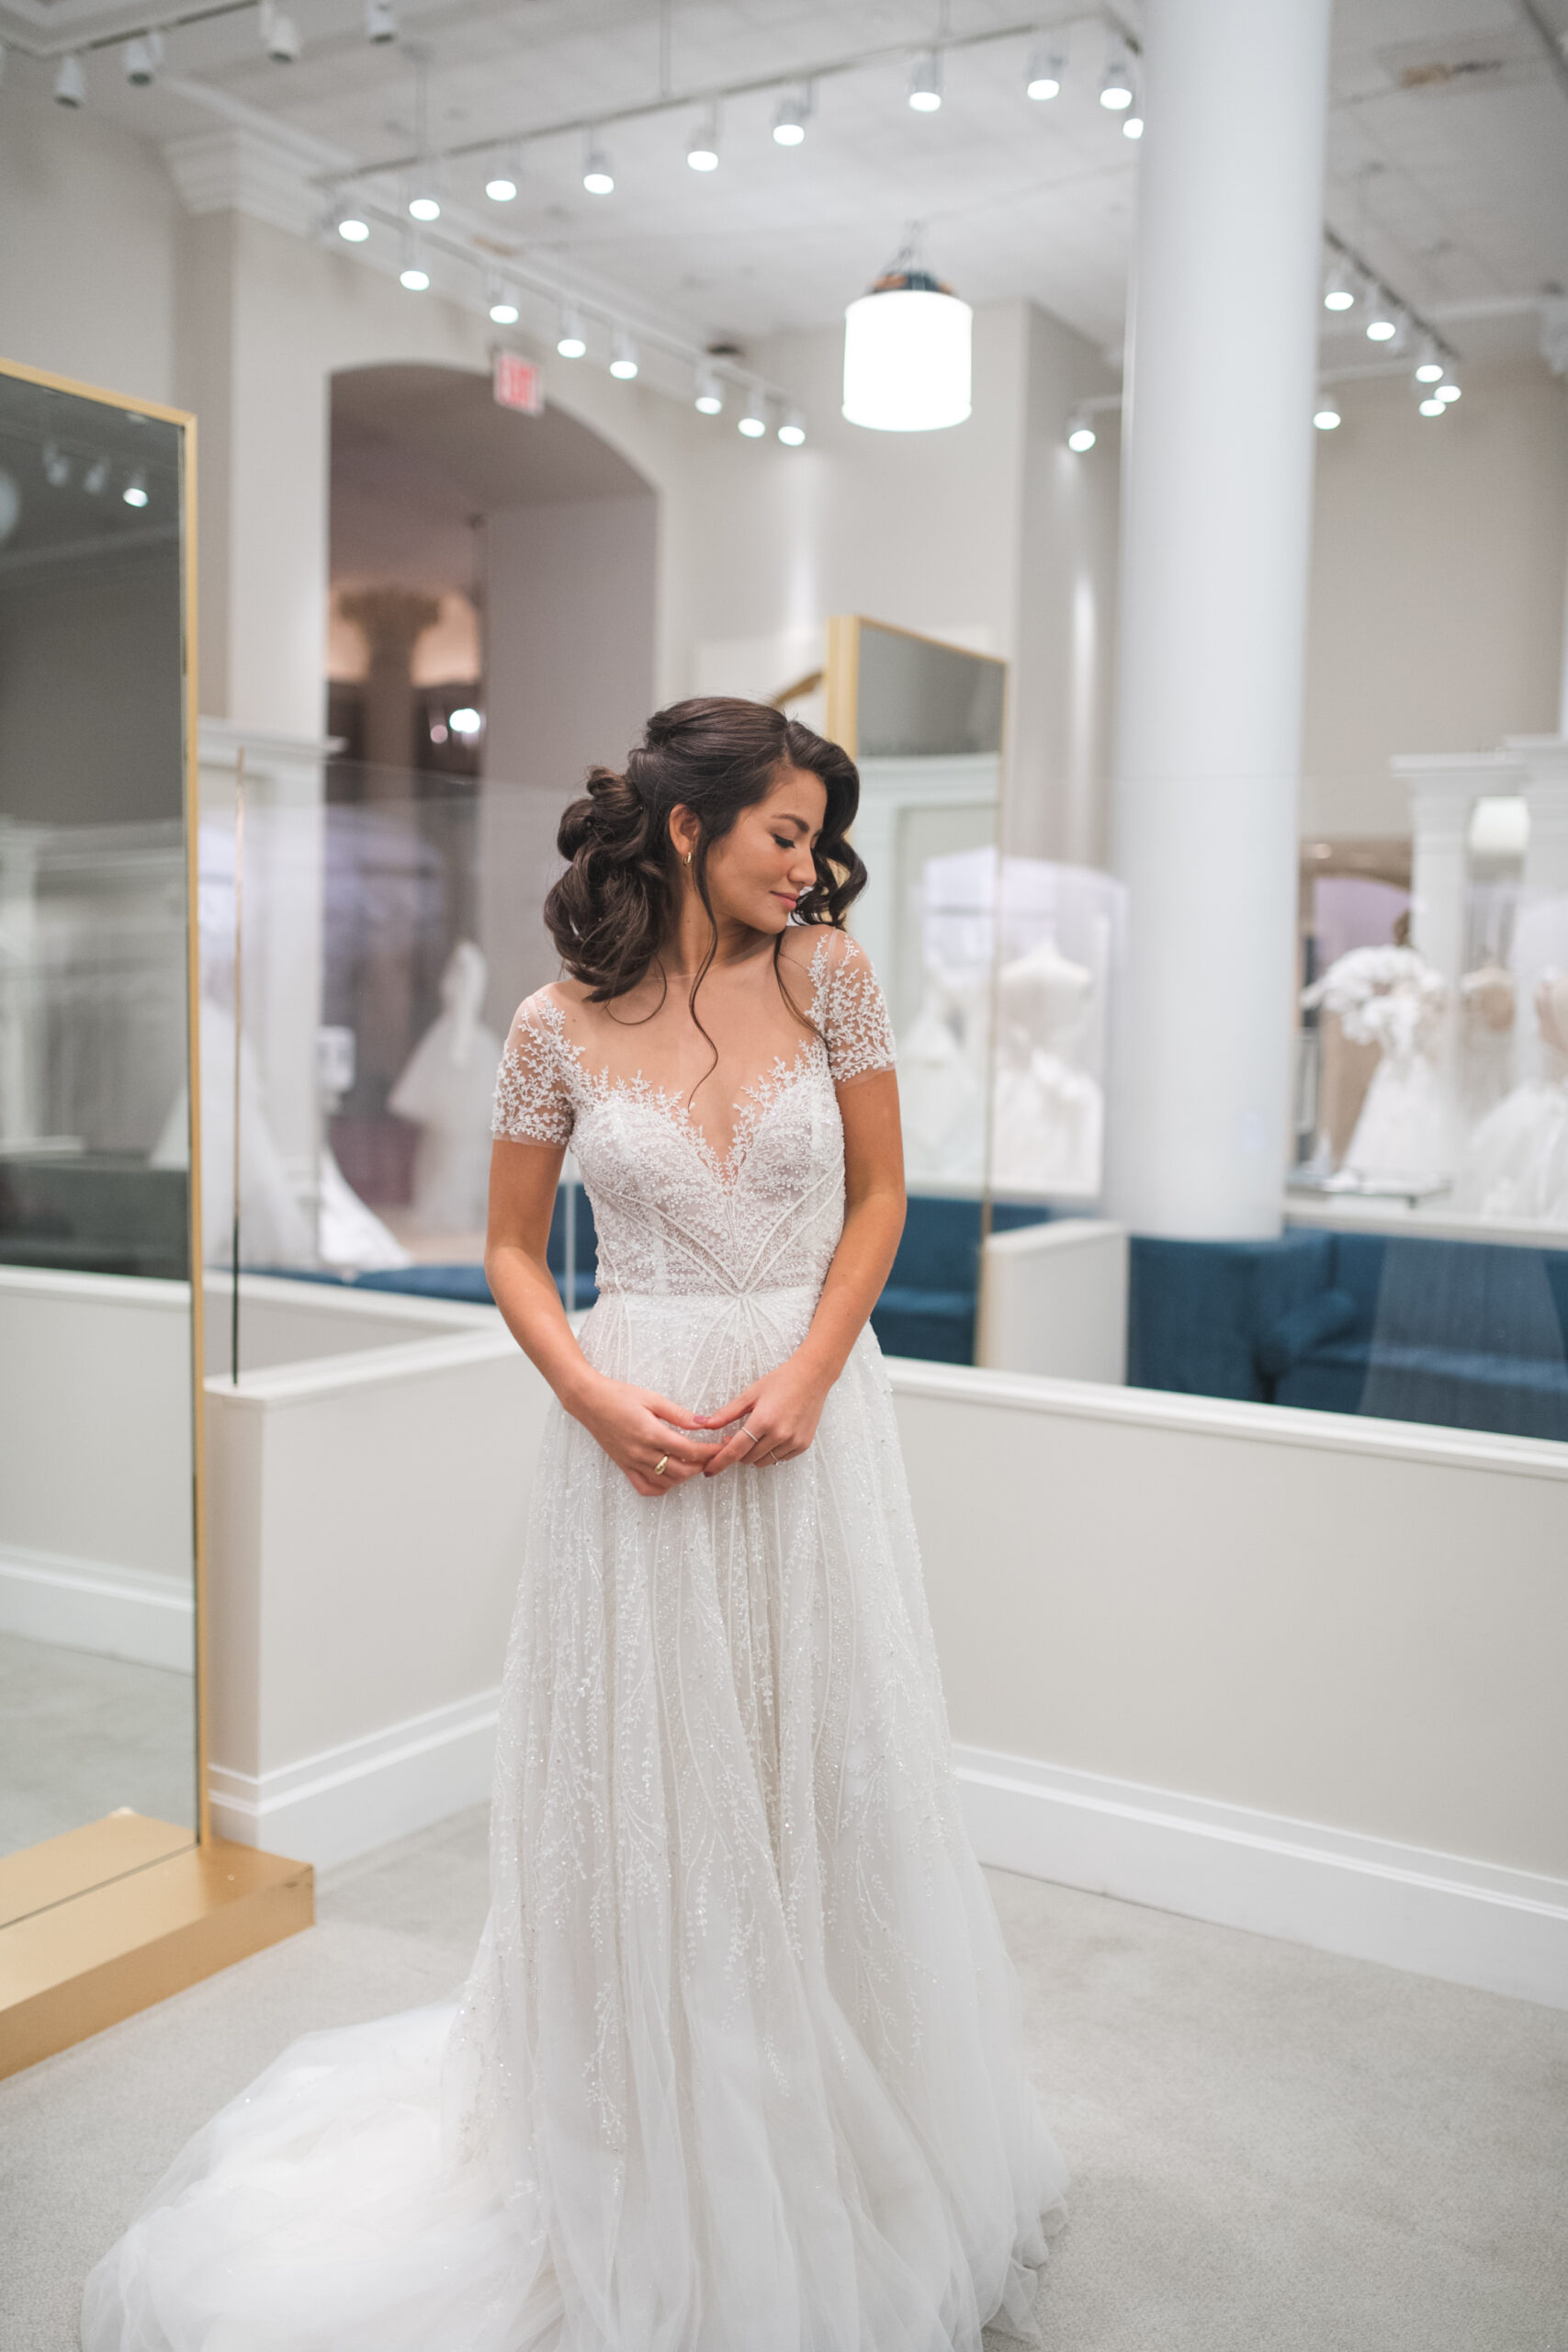 What it's like “Saying Yes to the Dress” at Kleinfeld Bridal